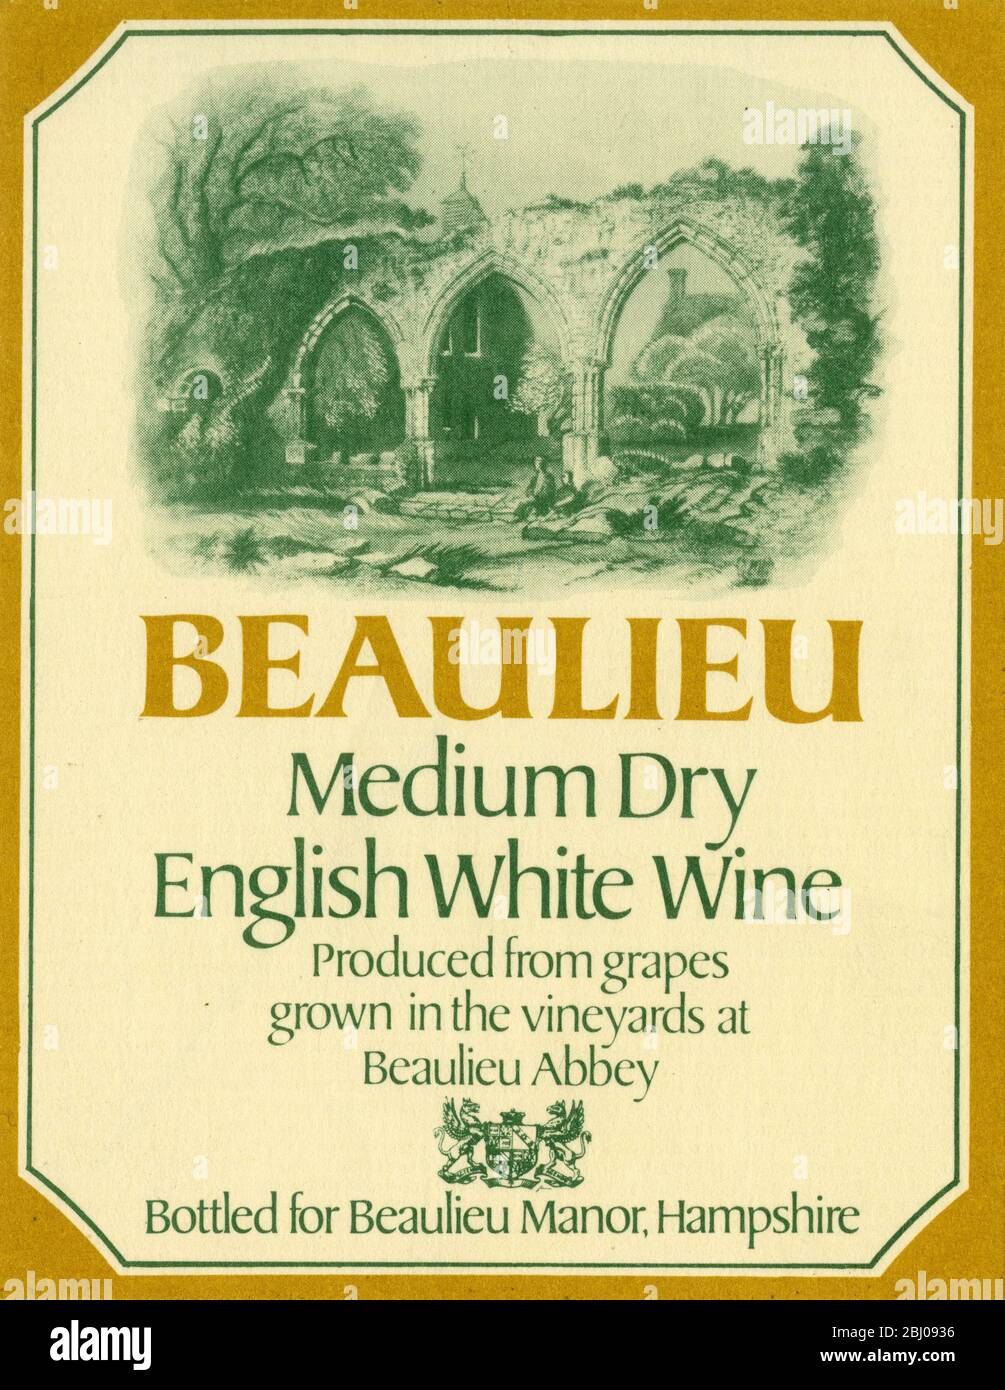 Wine Label. - Beaulieu. Medium Dry English White Wine. Produced from grapes gwon in the vineyards at Beaulieu Abbey. Bottled for Beaulieu Manor, Hampshire. Stock Photo